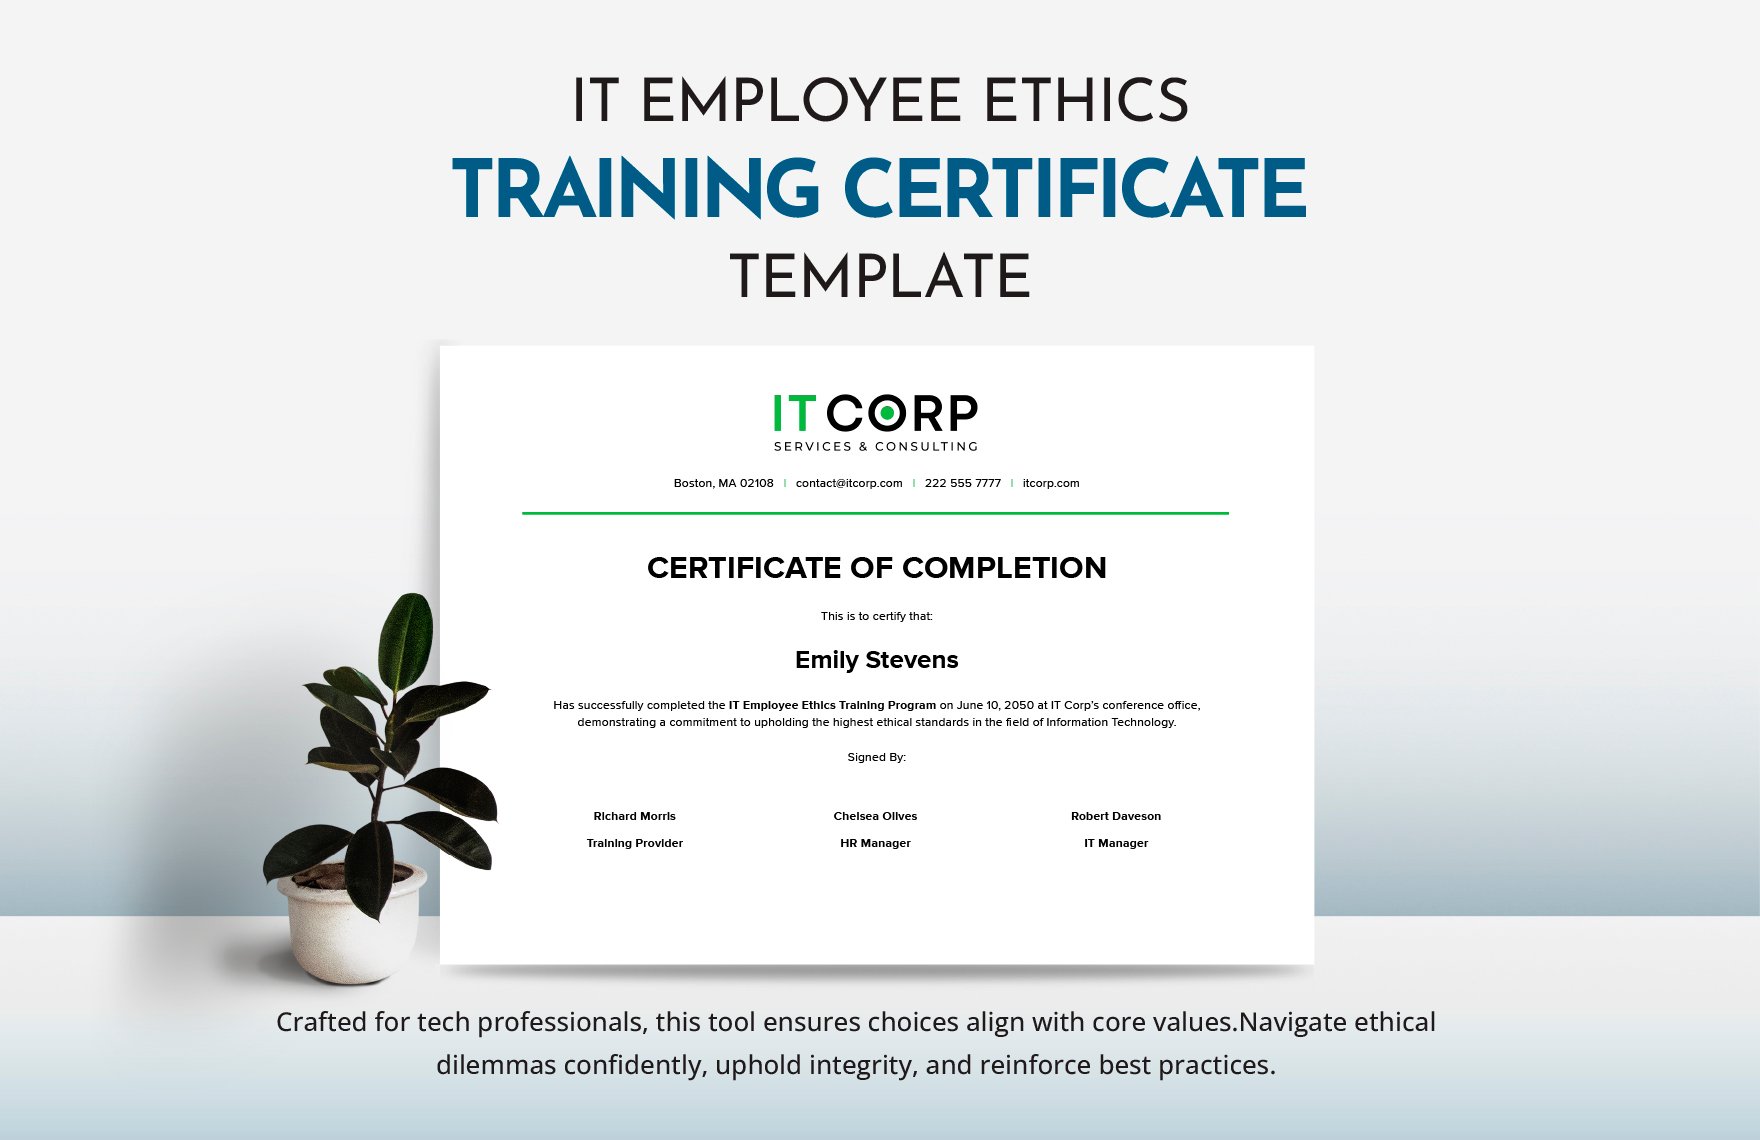 IT Employee Ethics Training Certificate Template